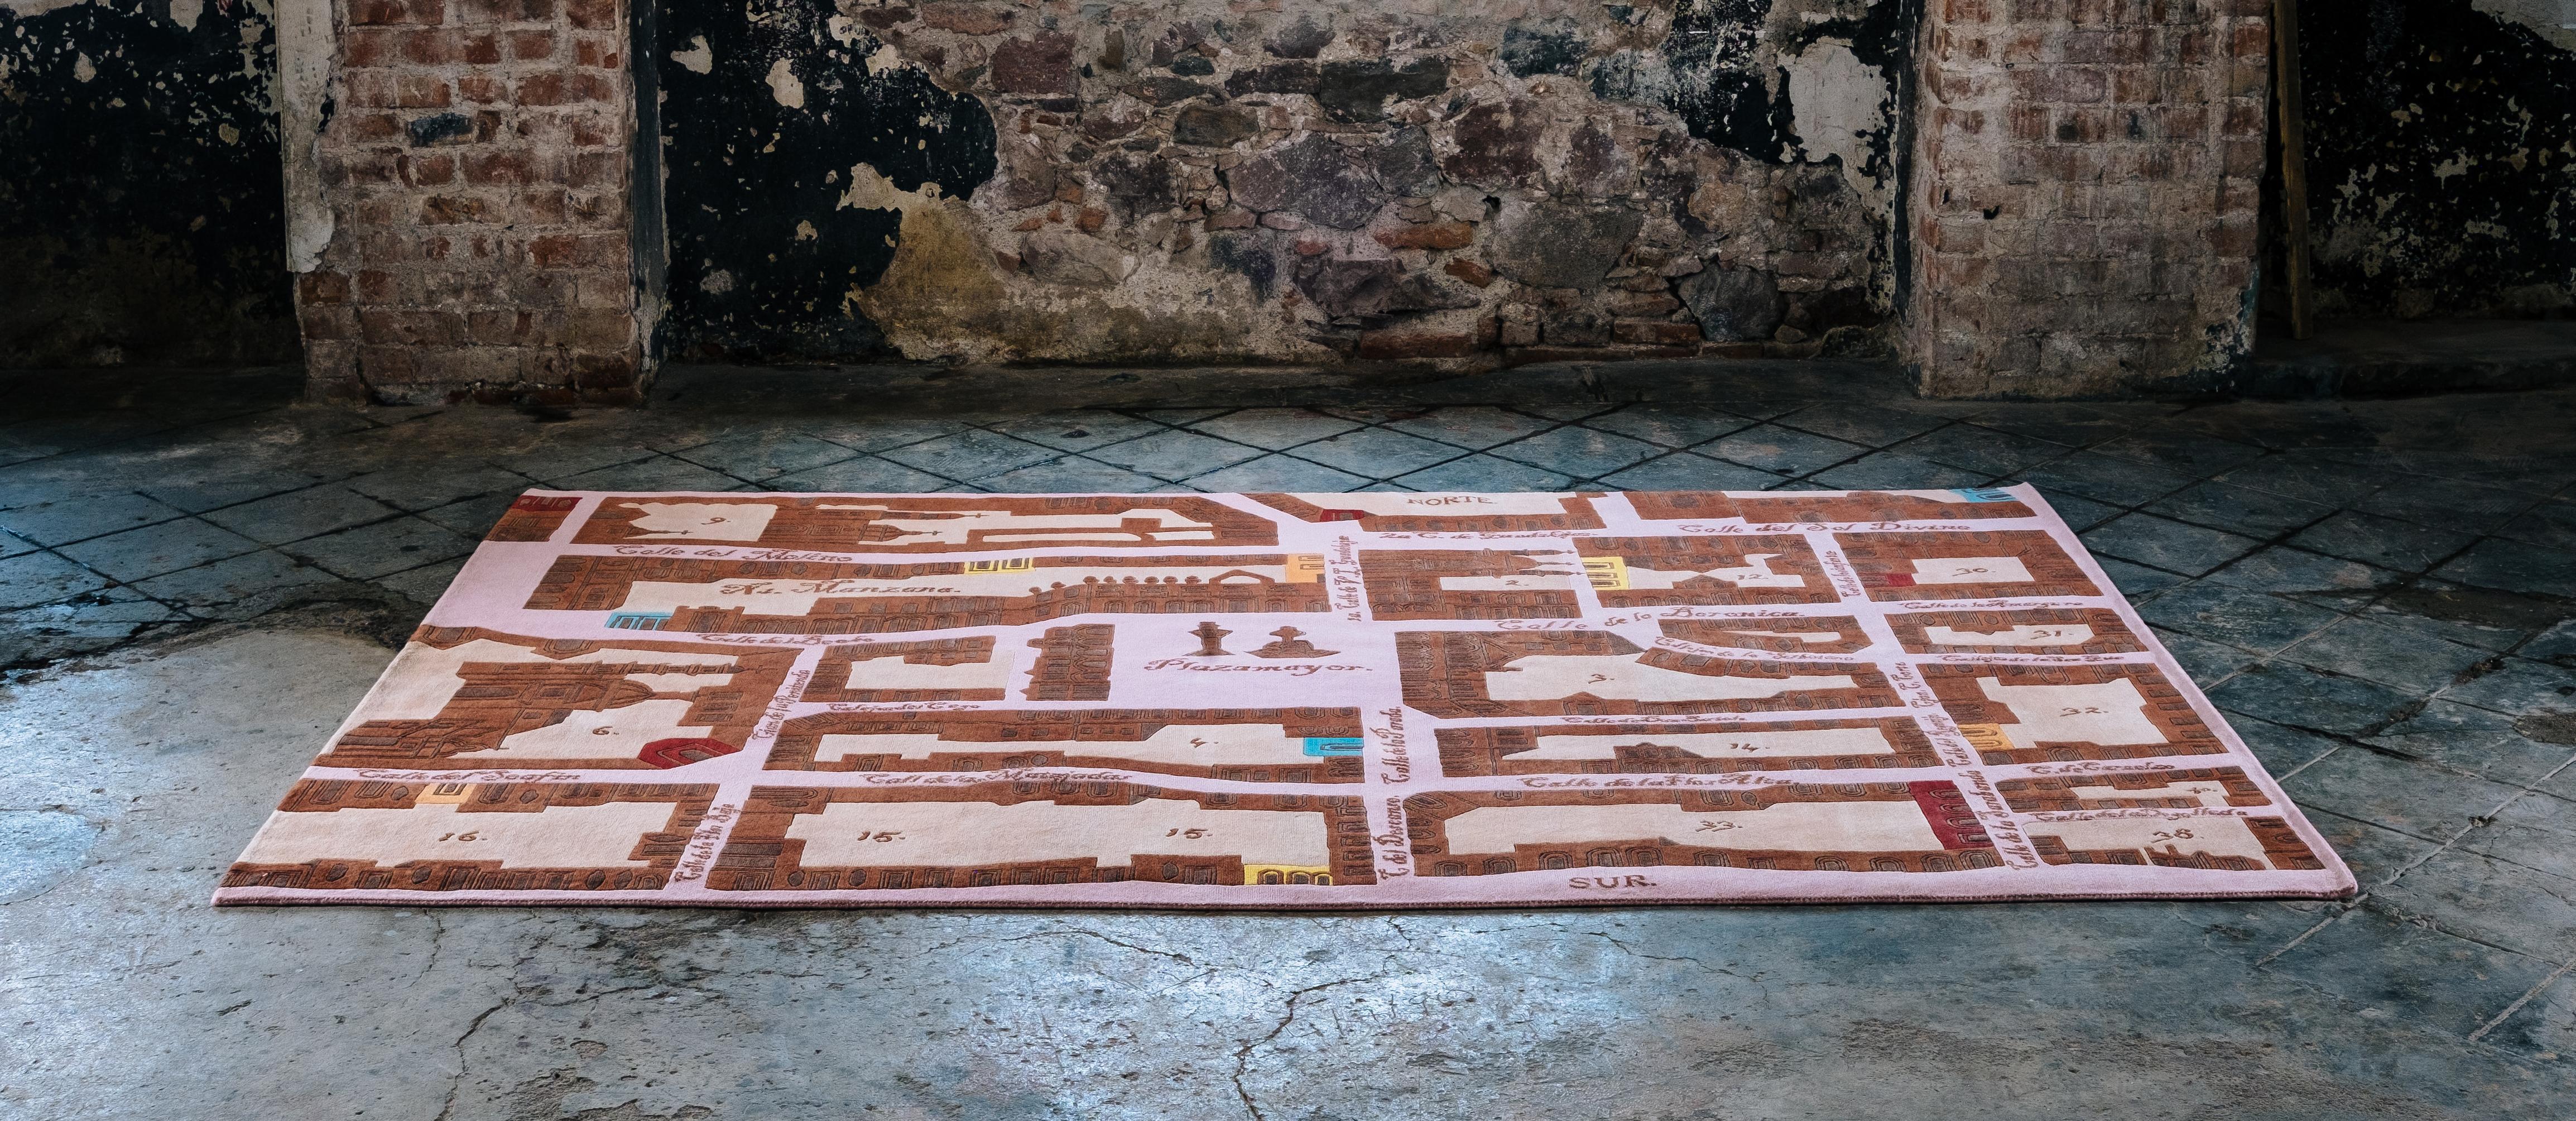 “Querétaro Histórico” was inspired by a map from 1759, created by José María Pantoja y Peña. This map, which is now housed at the Regional Museum in the former Convent of San Francisco, represents the 152 blocks that once formed Querétaro. This